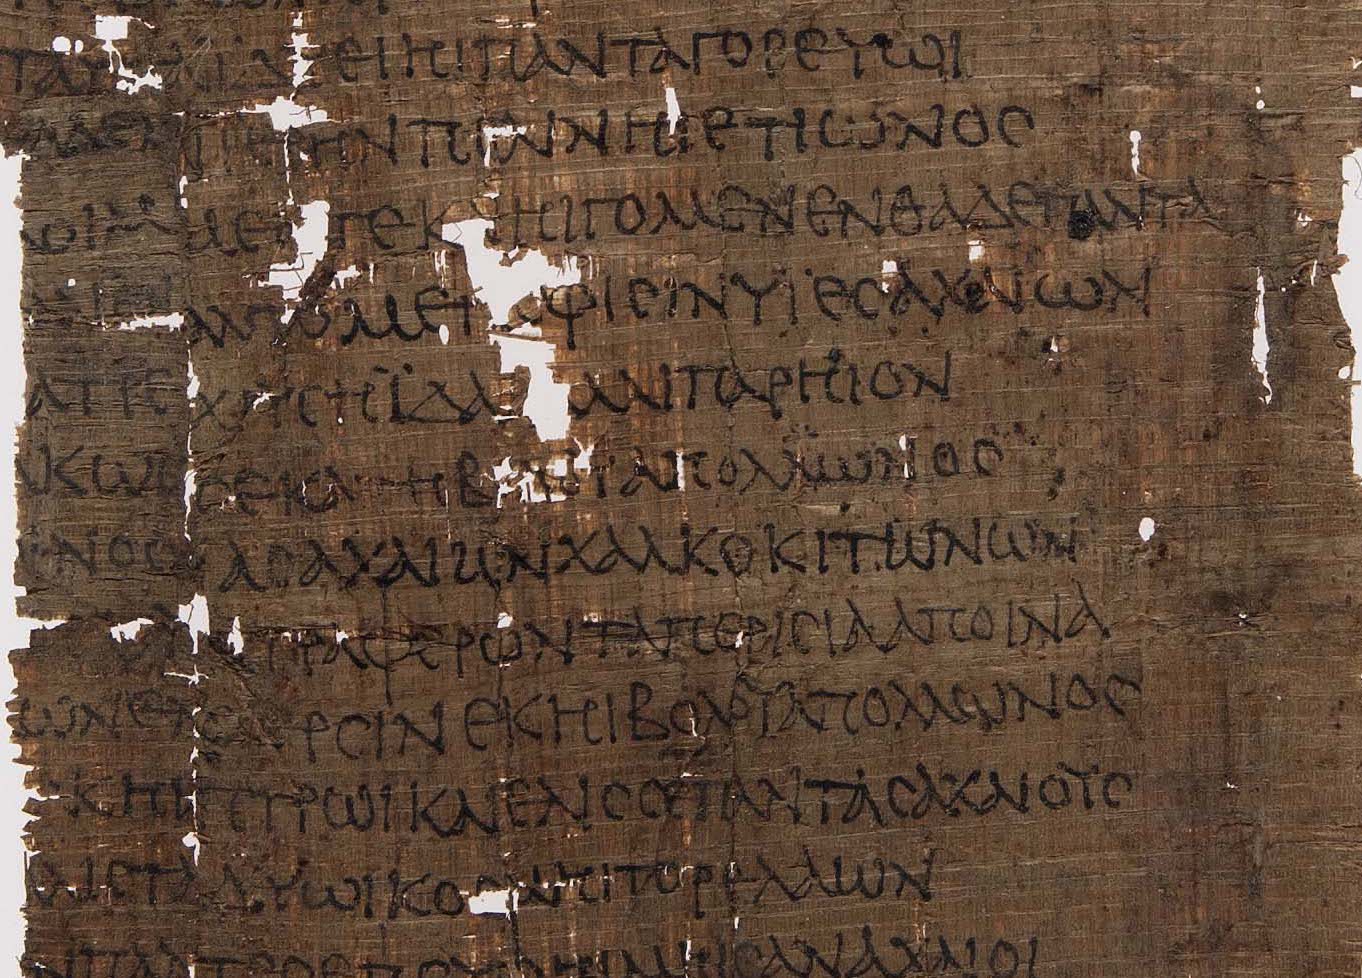 Recto image of P.CtYBR inv. 489 qua, which contains thirty-three lines of text from Homer's Illiad